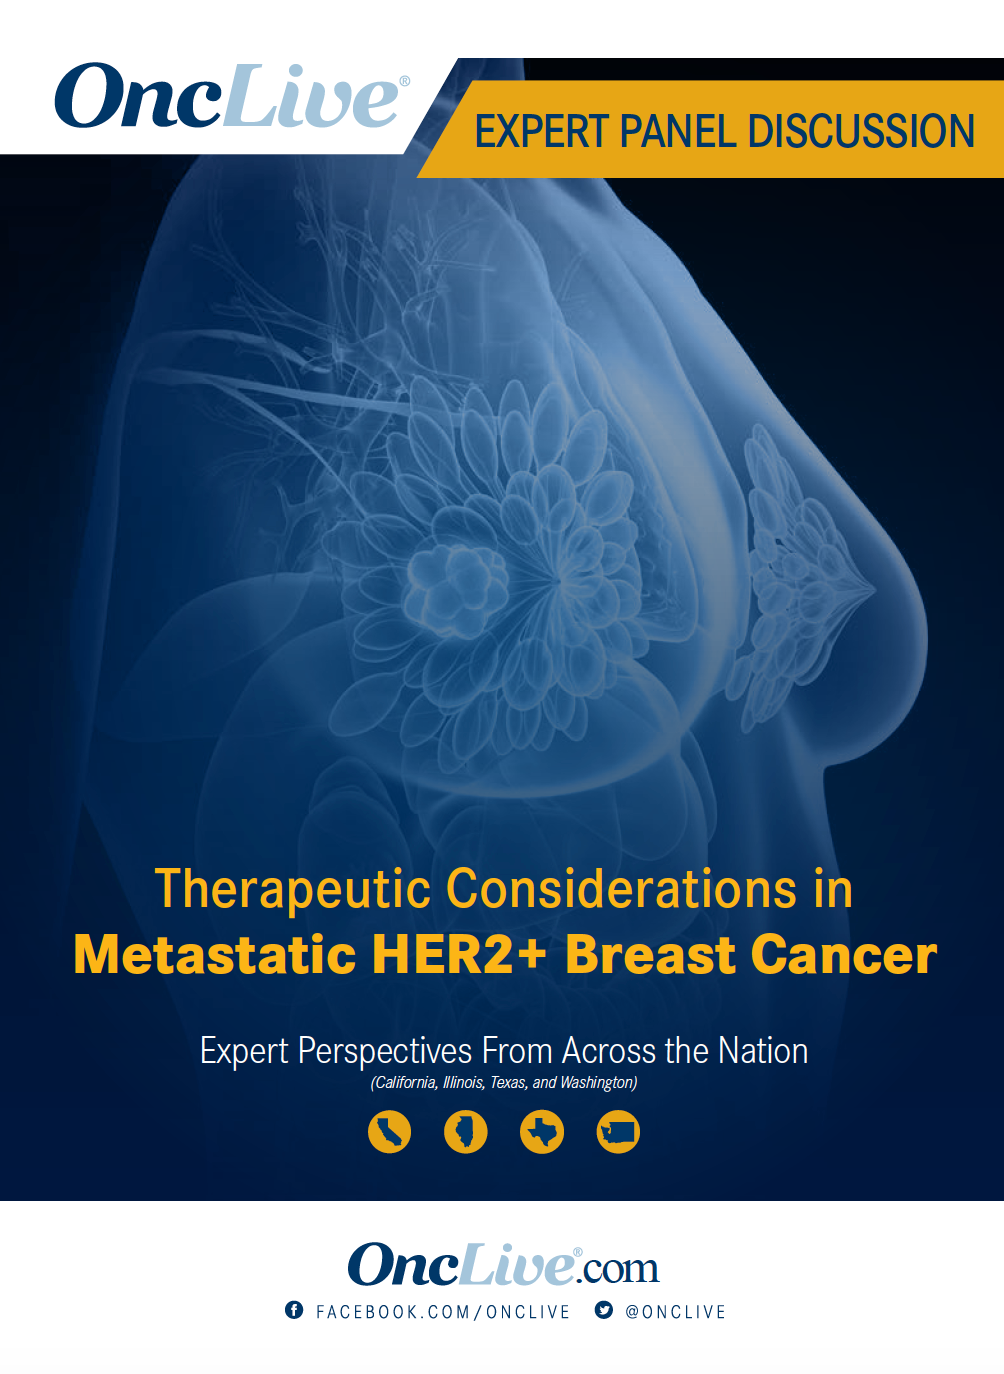 Therapeutic Considerations in Metastatic HER2+ Breast Cancer: Part 1